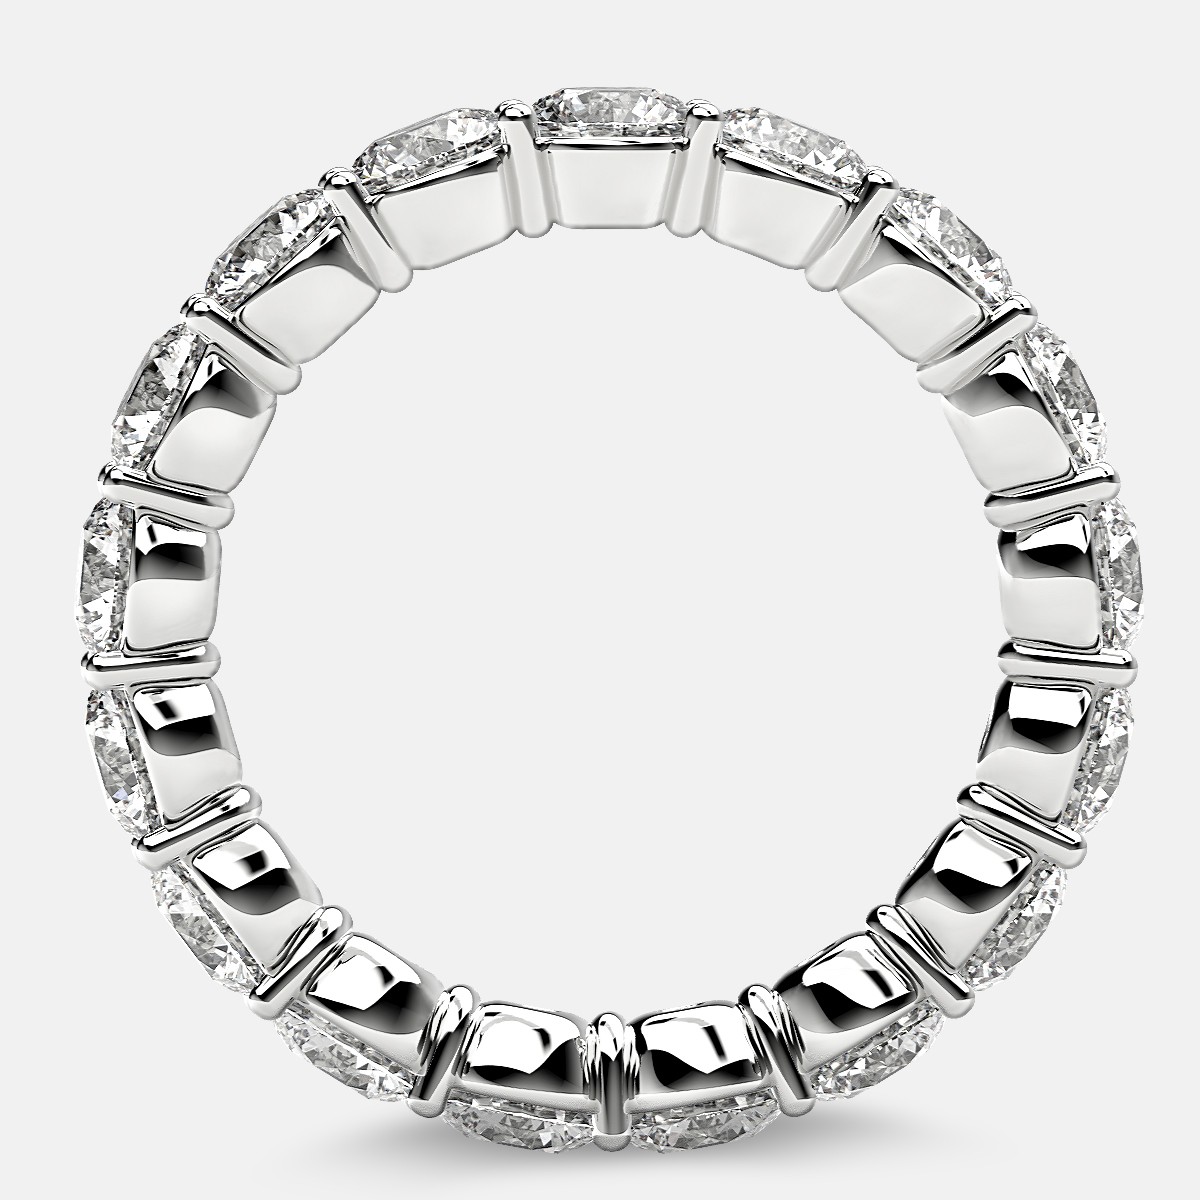 Classic Prong Set Eternity Ring with Round Diamonds in Platinum